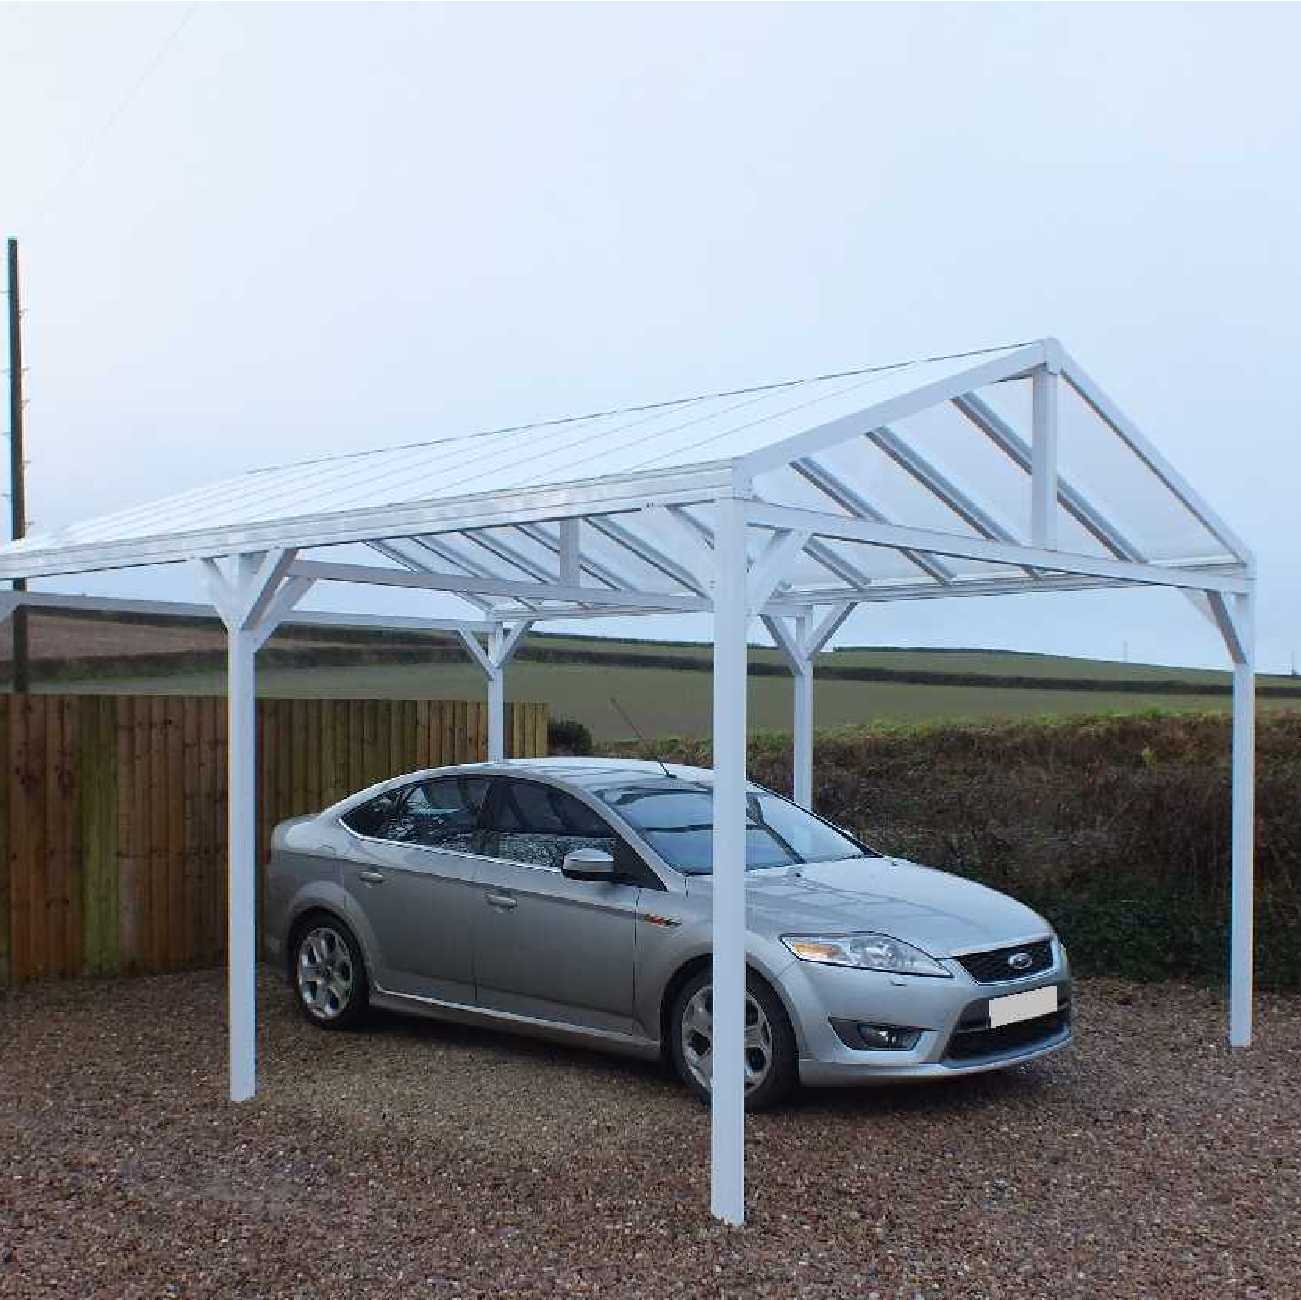 Affordable Omega Smart Free-Standing, White Gable-Roof (type 1) Canopy with 16mm Polycarbonate Glazing - 7.4m (W) x 3.5m (P), (8) Supporting Posts